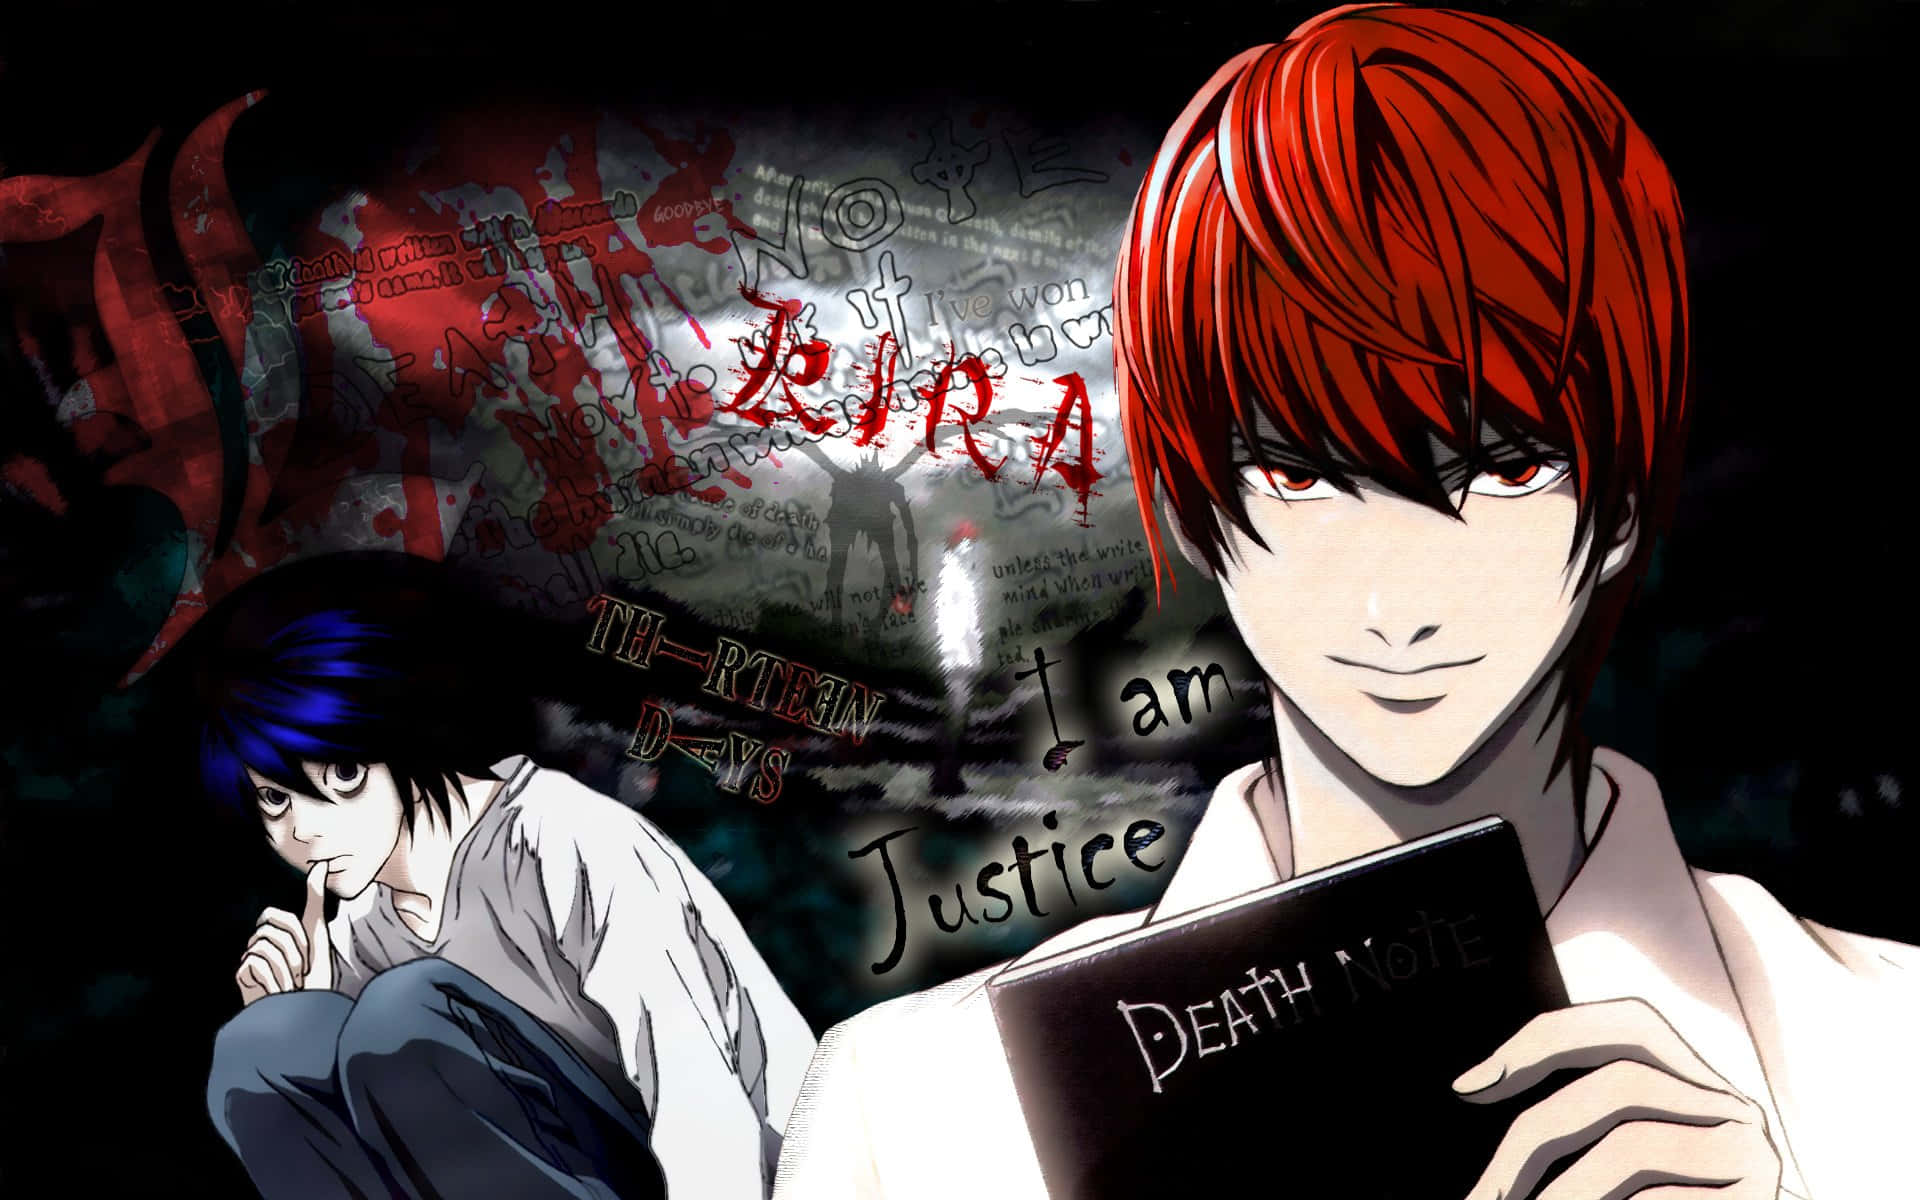 Investigation heats up as L delves deeper into the supernatural world of Death Note